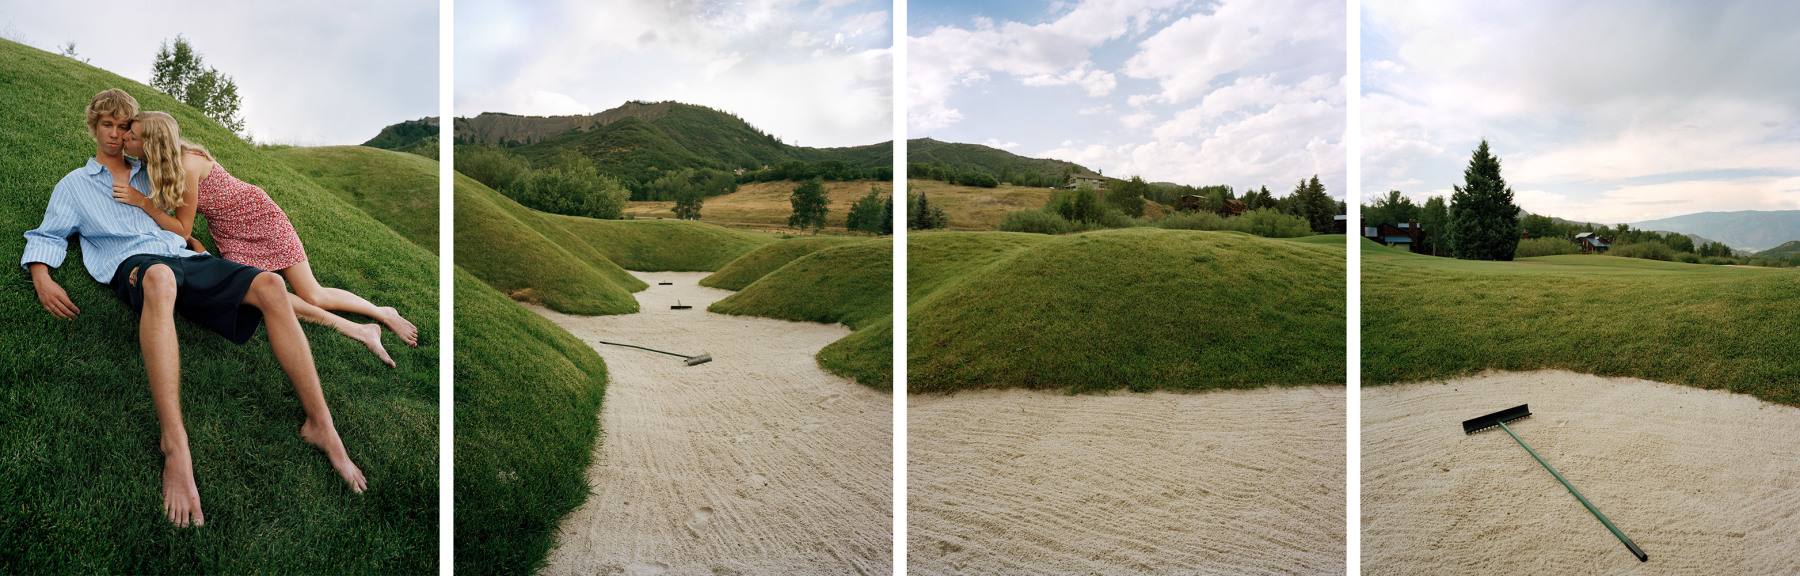 Trap, 2007.&nbsp;Four-panel archival pigment print, available as&nbsp;24 x 80 or 40 x 120 inches.&nbsp;